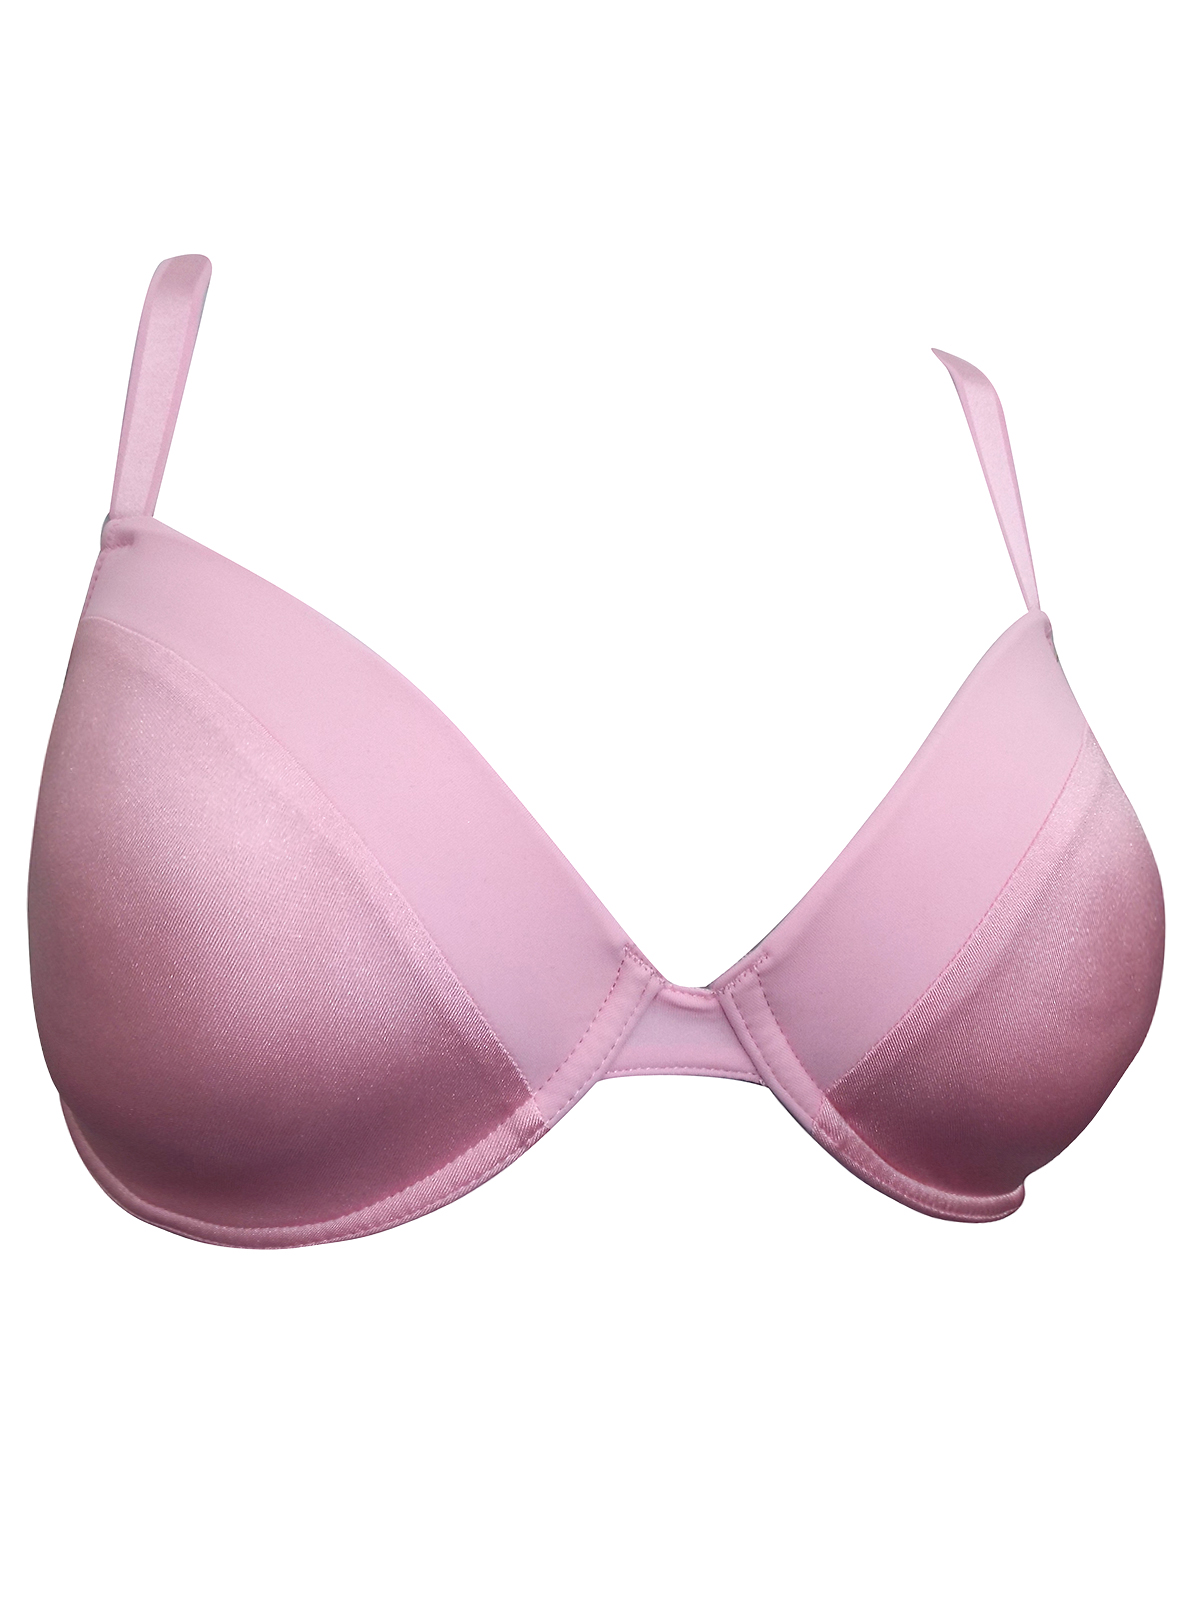 Ellos Ellos PINK Padded & Wired Full Cup Bra Size 32